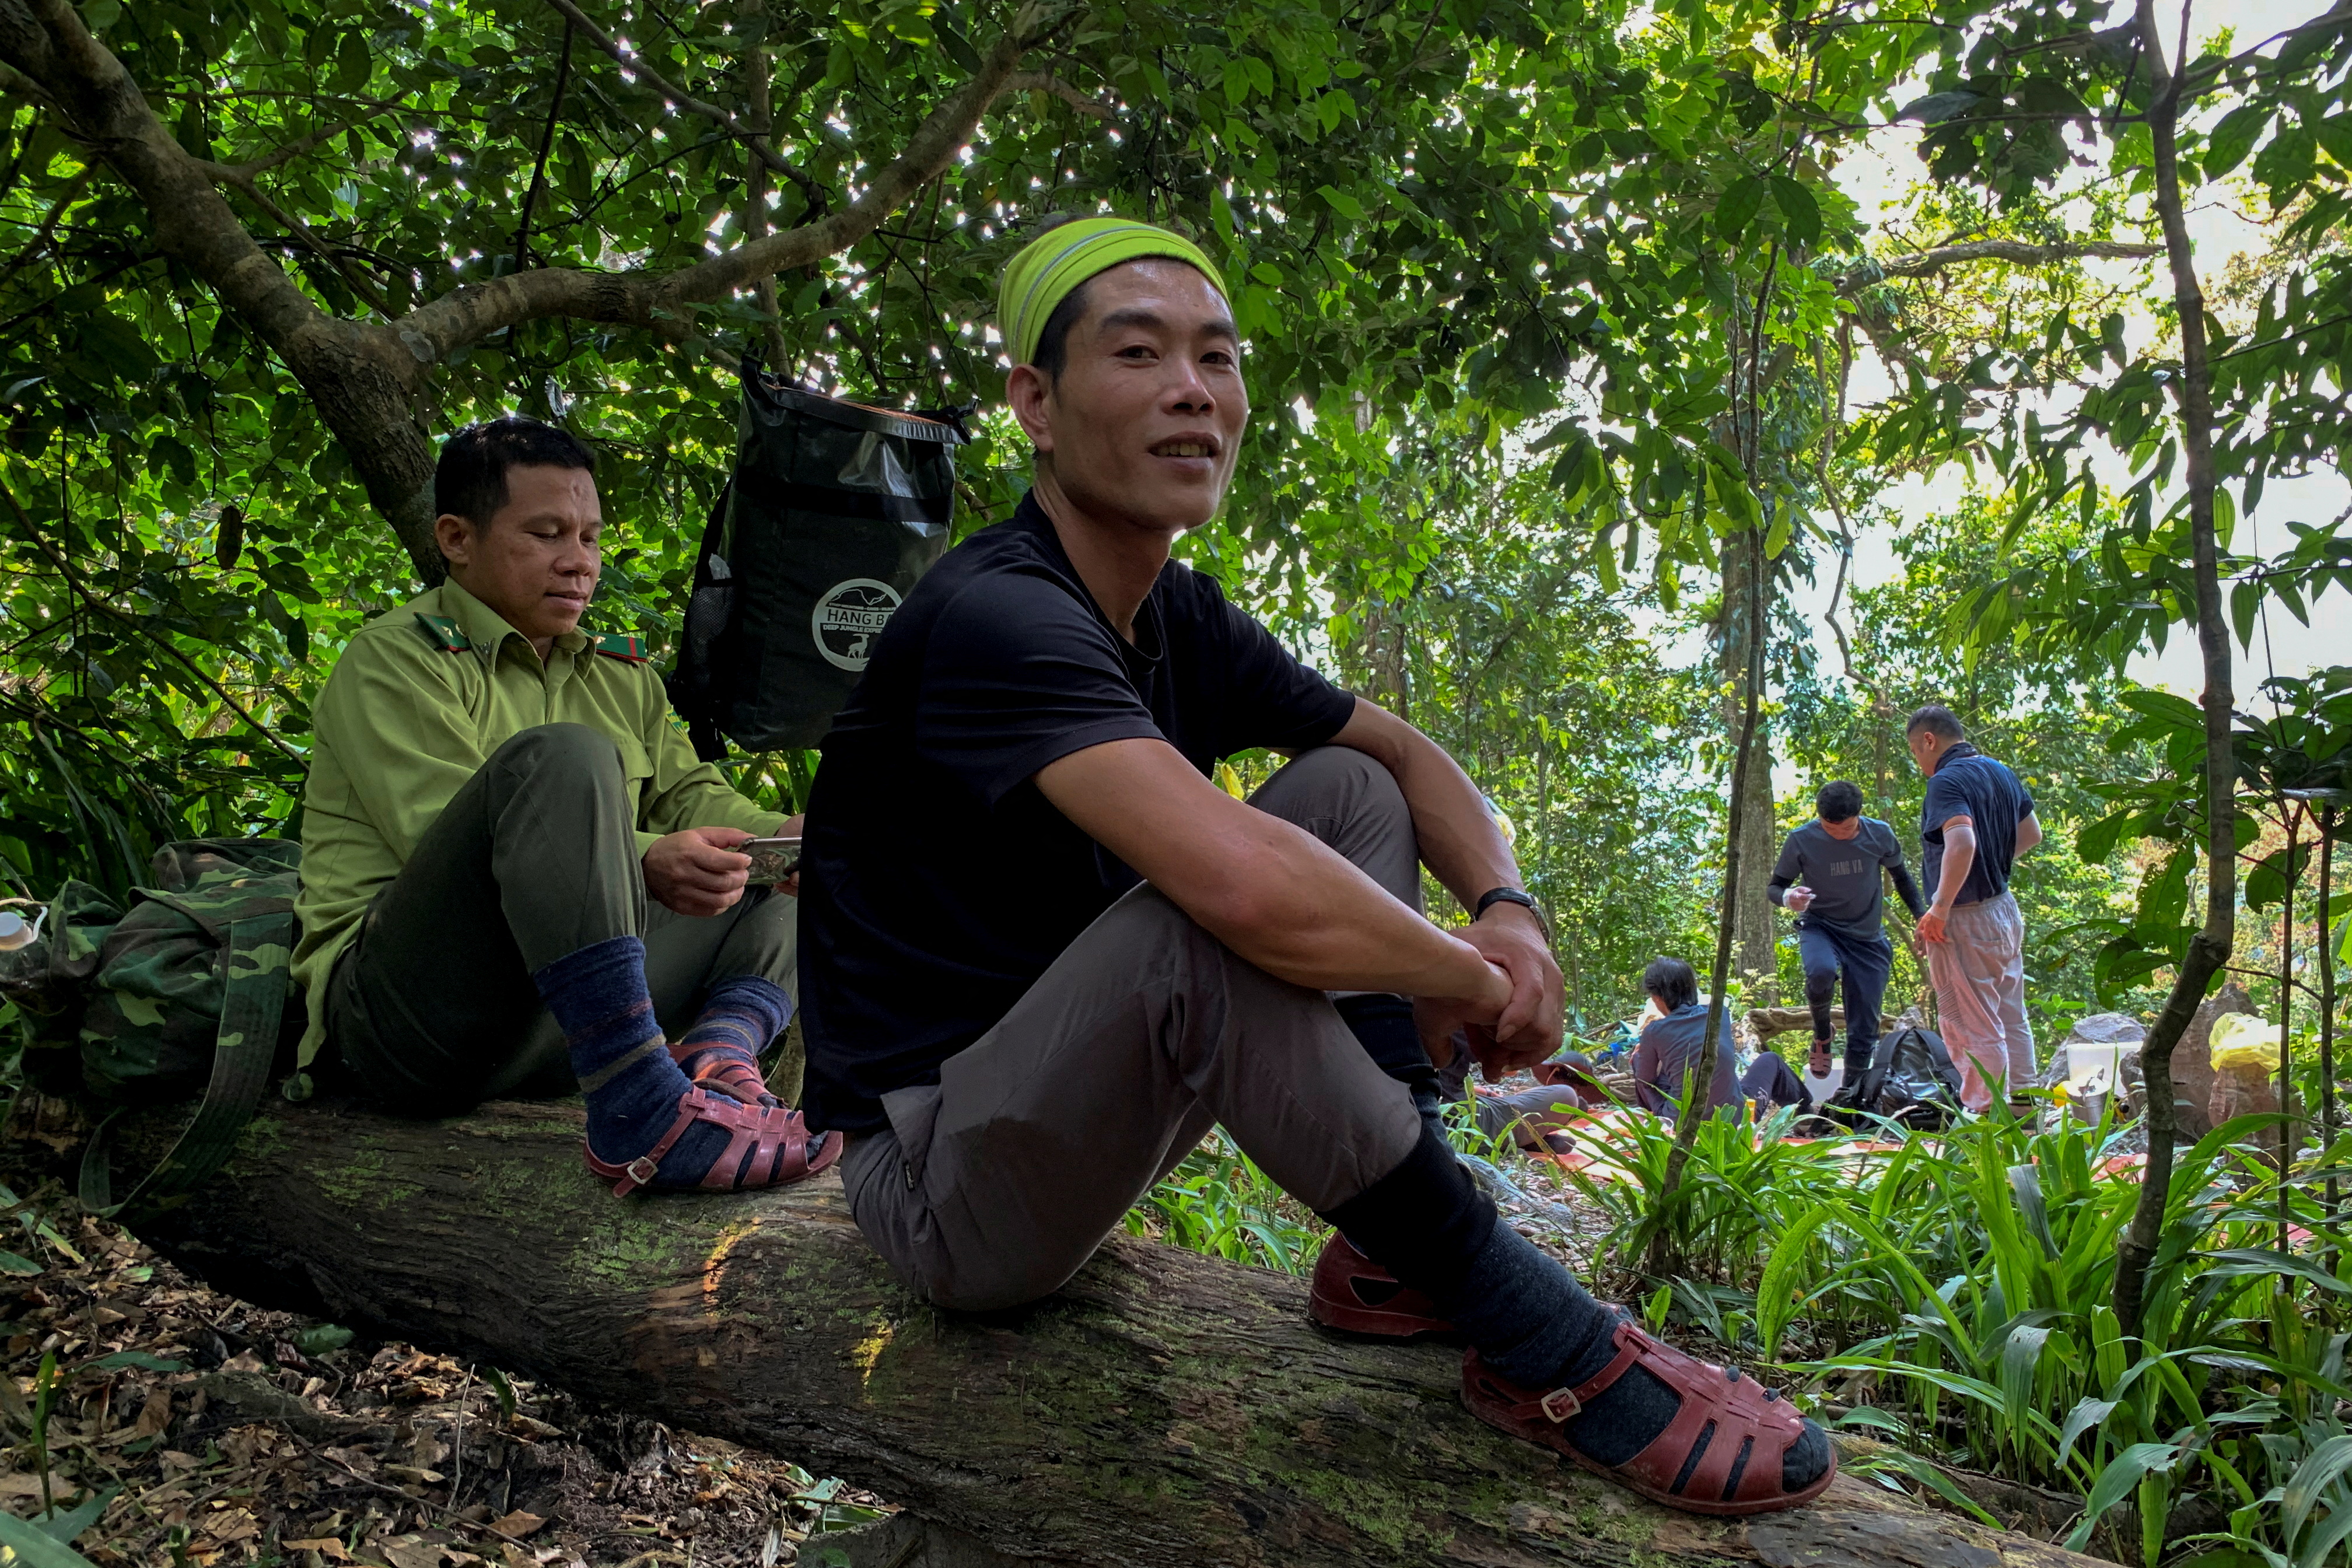 Nguyen Ngoc Anh, 36, who was an illegal logger turned forest protector poses at Phong Nha National Park, Quang Binh province